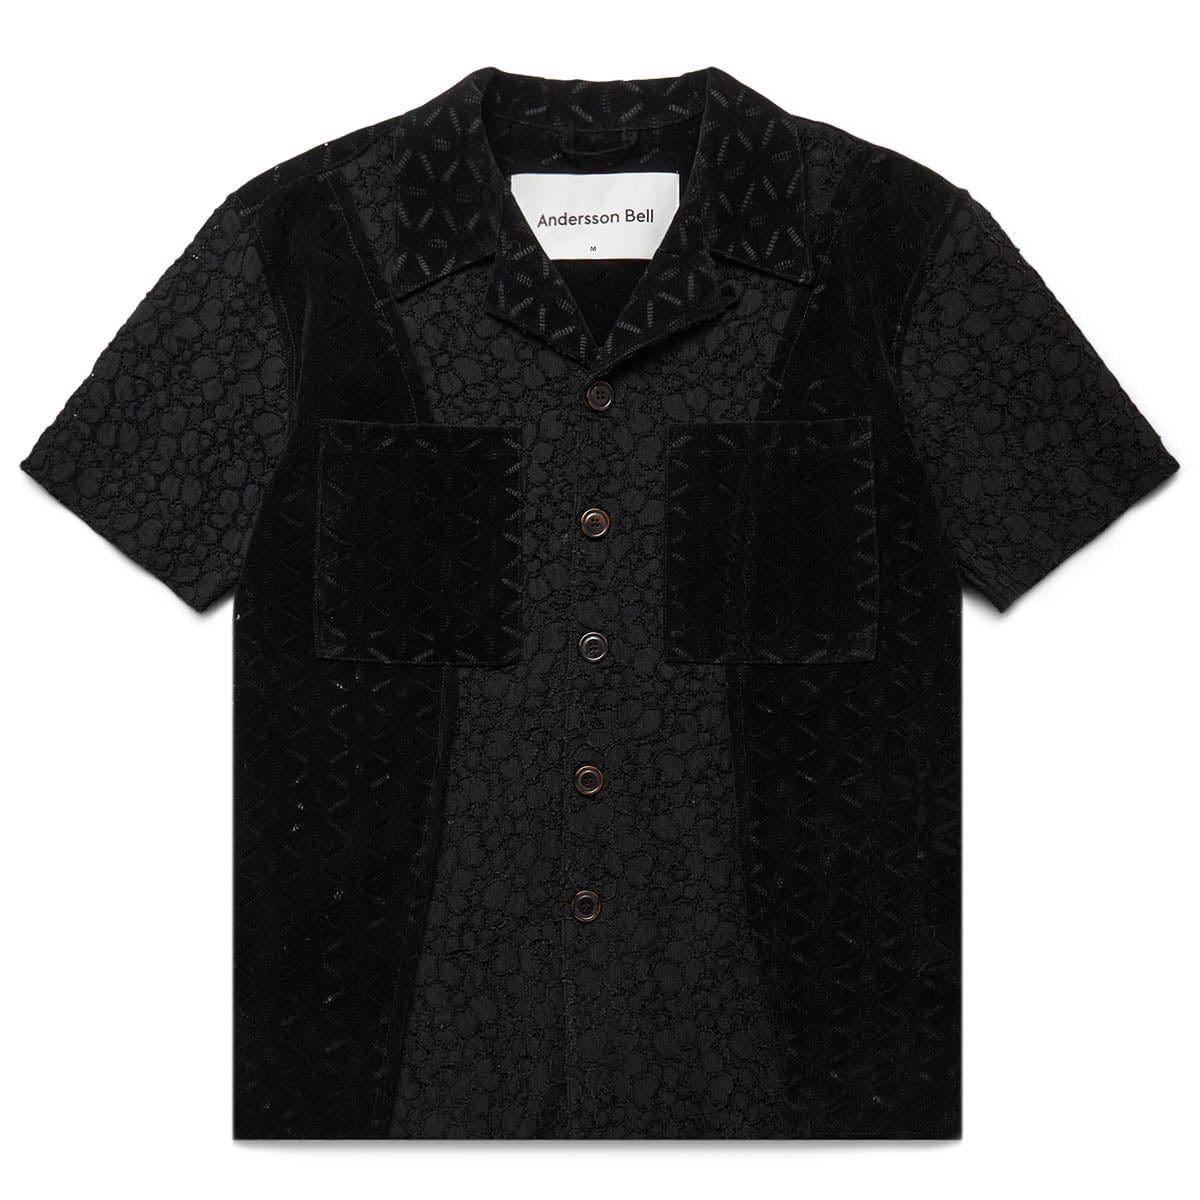 Andersson Bell Shirts HALF SHEER FLOWER LACE SHIRT